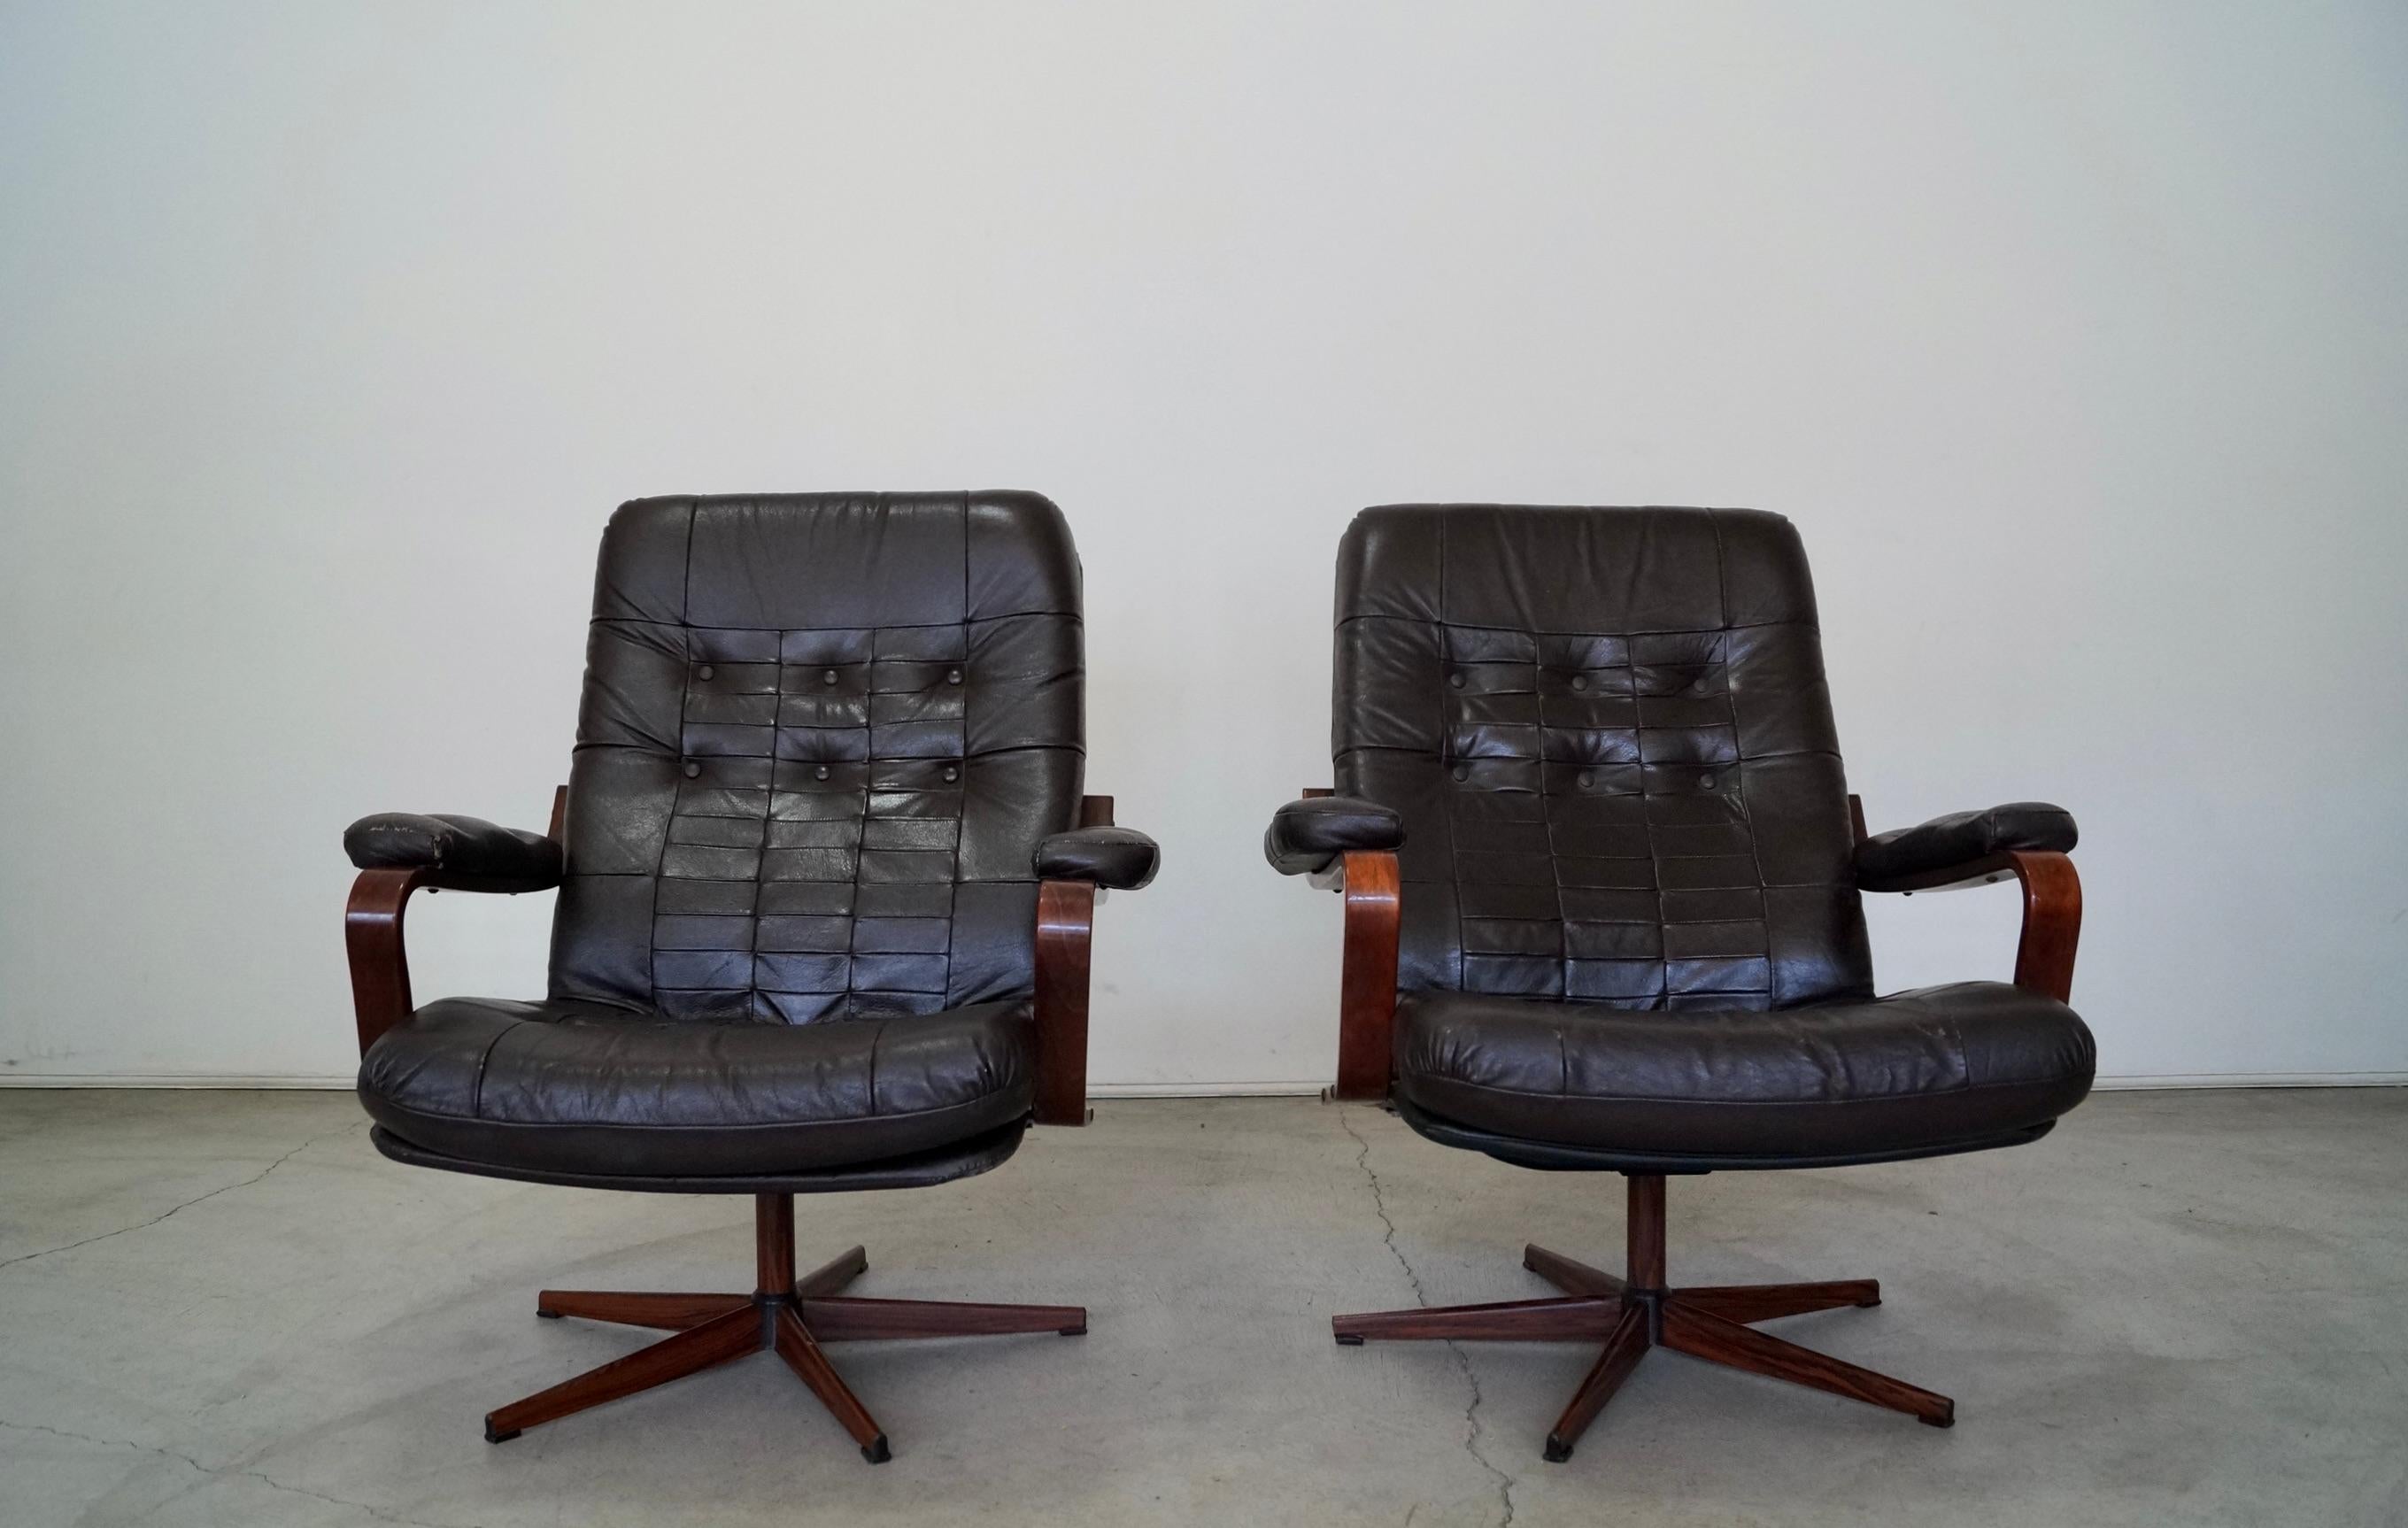 Pair of Mid-Century Modern lounge chairs for sale. From Scandinavia, and in the manner of Westnofa. Manufactured by Kropp/Stolen in the 60's in Sweden, and imported by Finmark. It has a metal star base with a rosewood finish, and a metal pole that